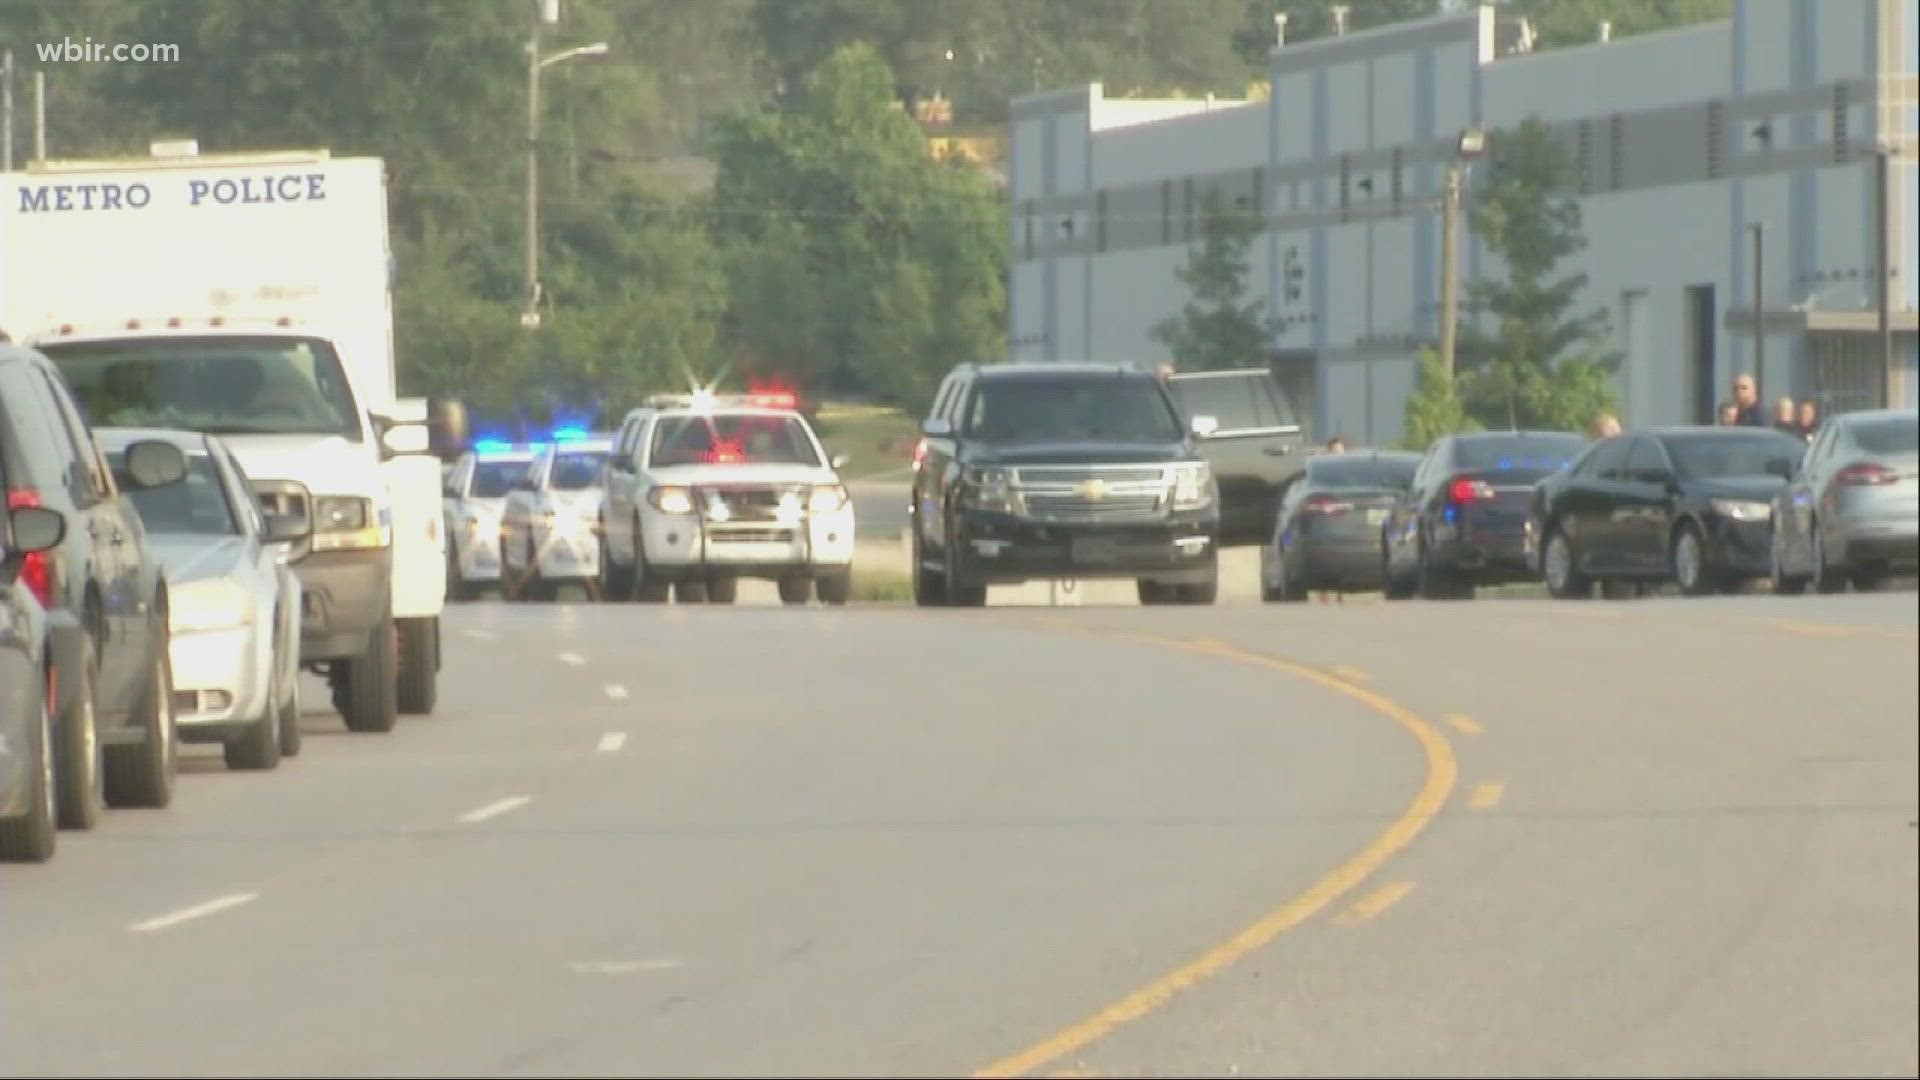 In Nashville, a suspected gunman is dead after a shooting inside a Smile Direct club facility.